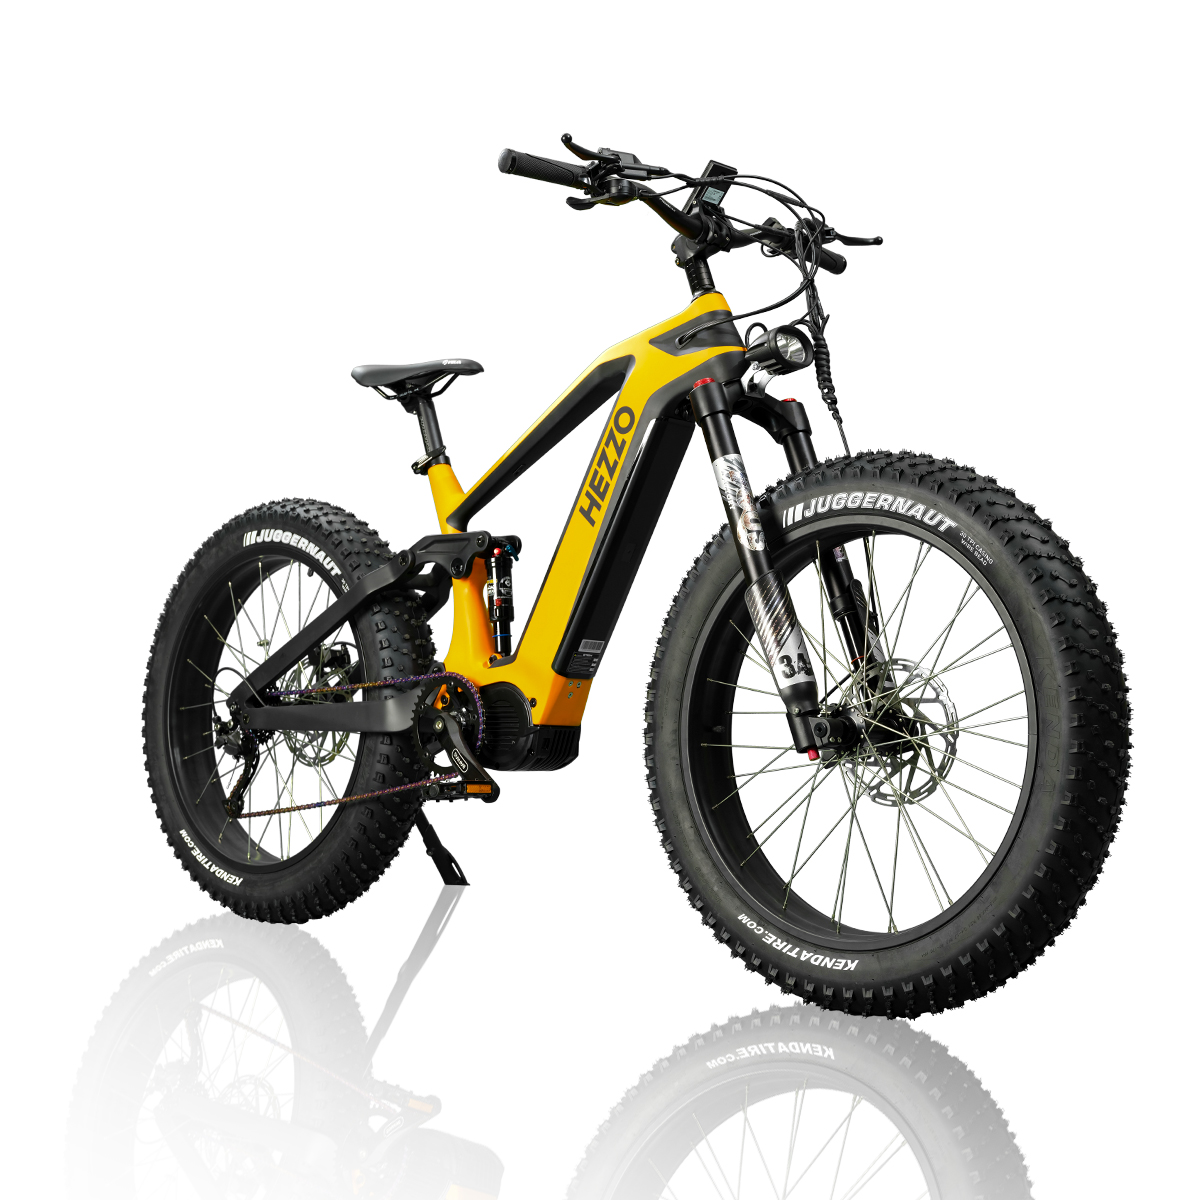 HEZZO HM-26Pro فیبر کربن Ebike 52V 1000W Bafang M620 Mid Drive Electric Bike Shimano 9 Speed ​​21AH LG 21700 Battery DNM Full Suspension Snow & Off Road 26×4.8" Kenda Fat Tire Mope...